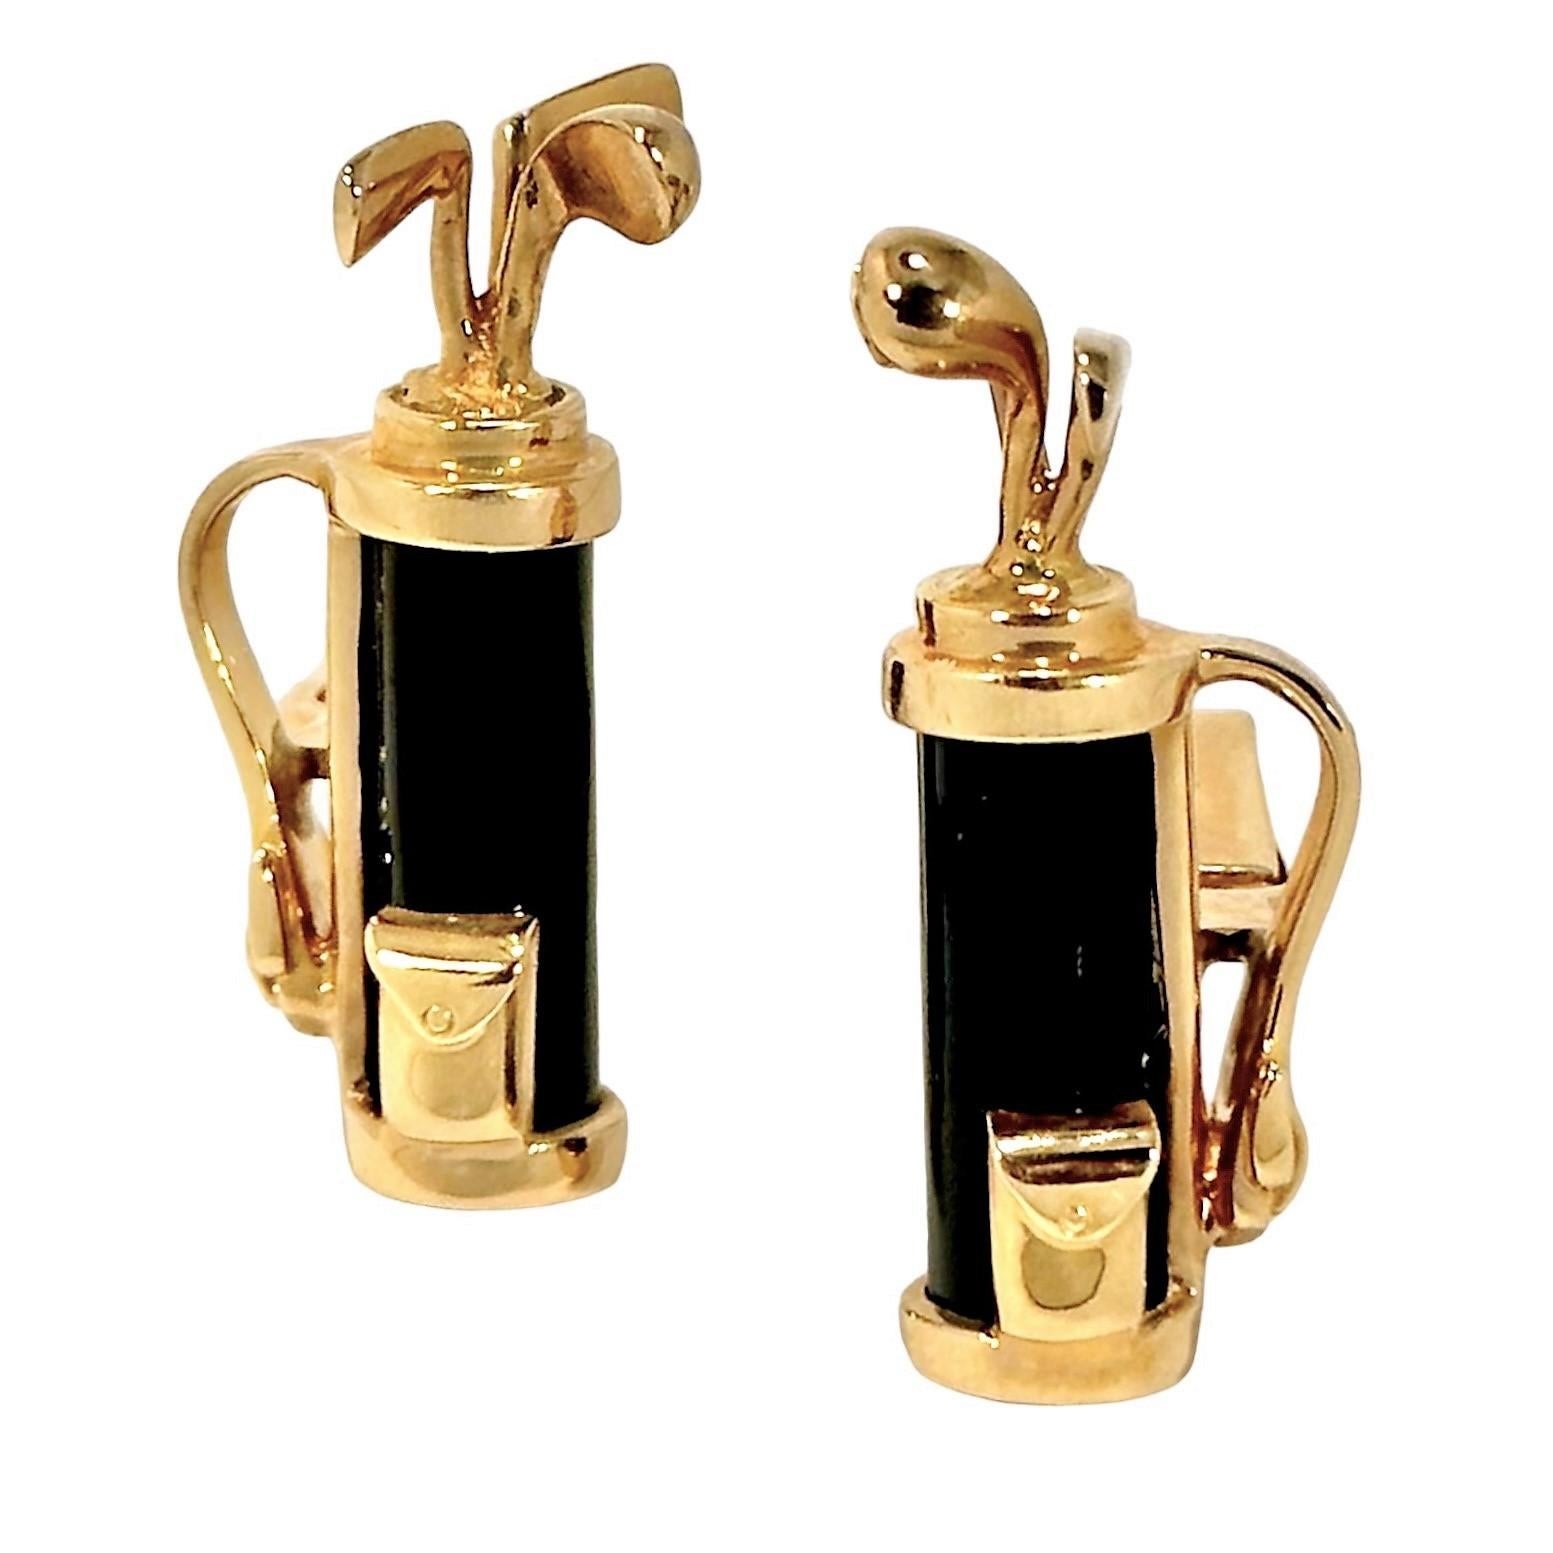 This somewhat whimsical and well crafted four button stud set is the perfect accessory for any golf enthusiast. Precision crafted in 14k yellow gold and high polished cylinders of black onyx, this set is will surely intrigue and delight. A